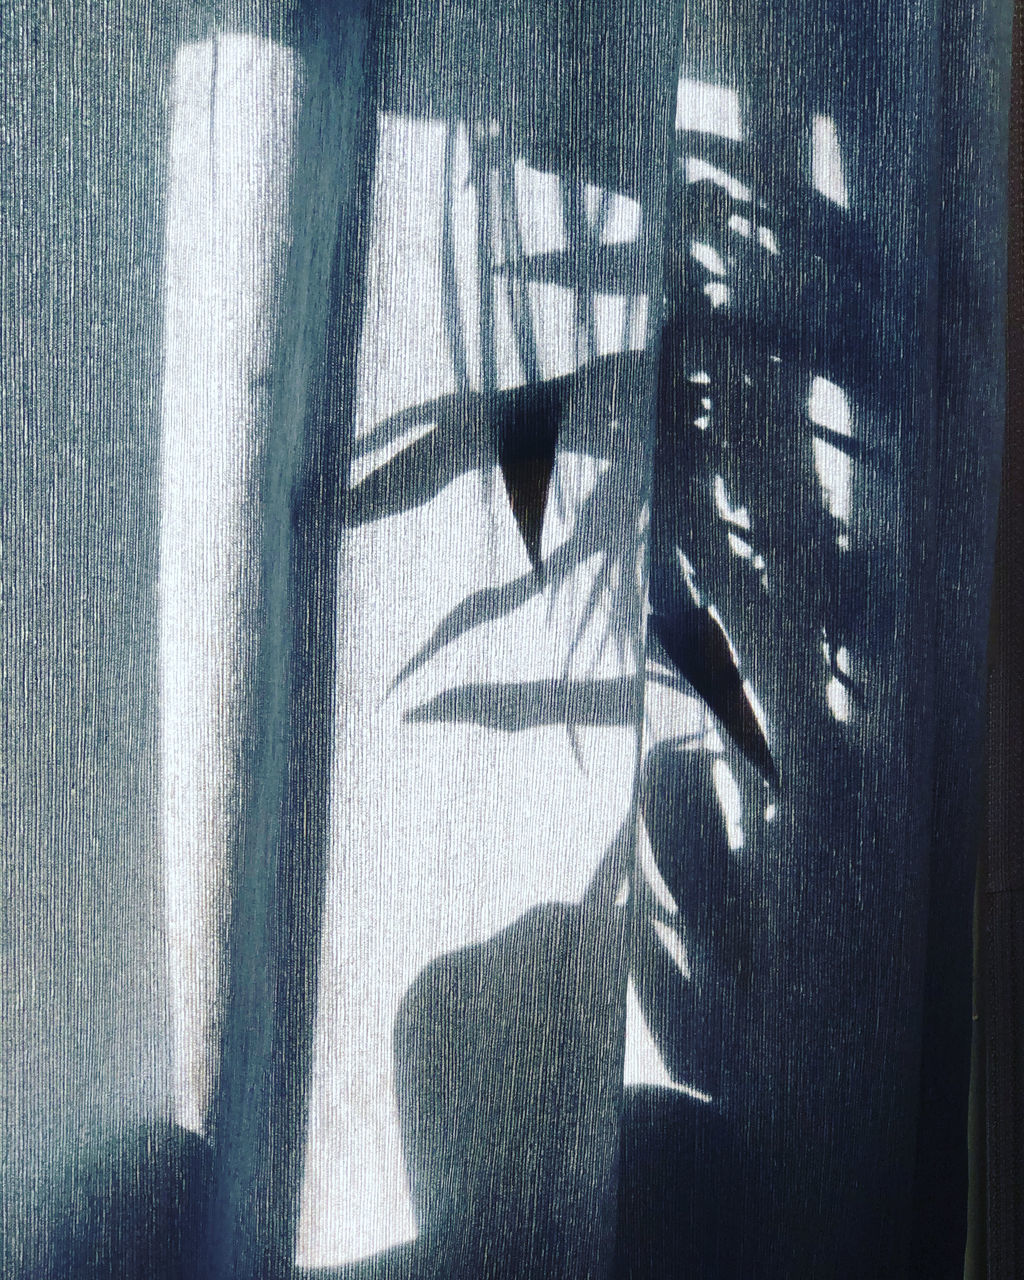 SHADOW OF PERSON ON WINDOW